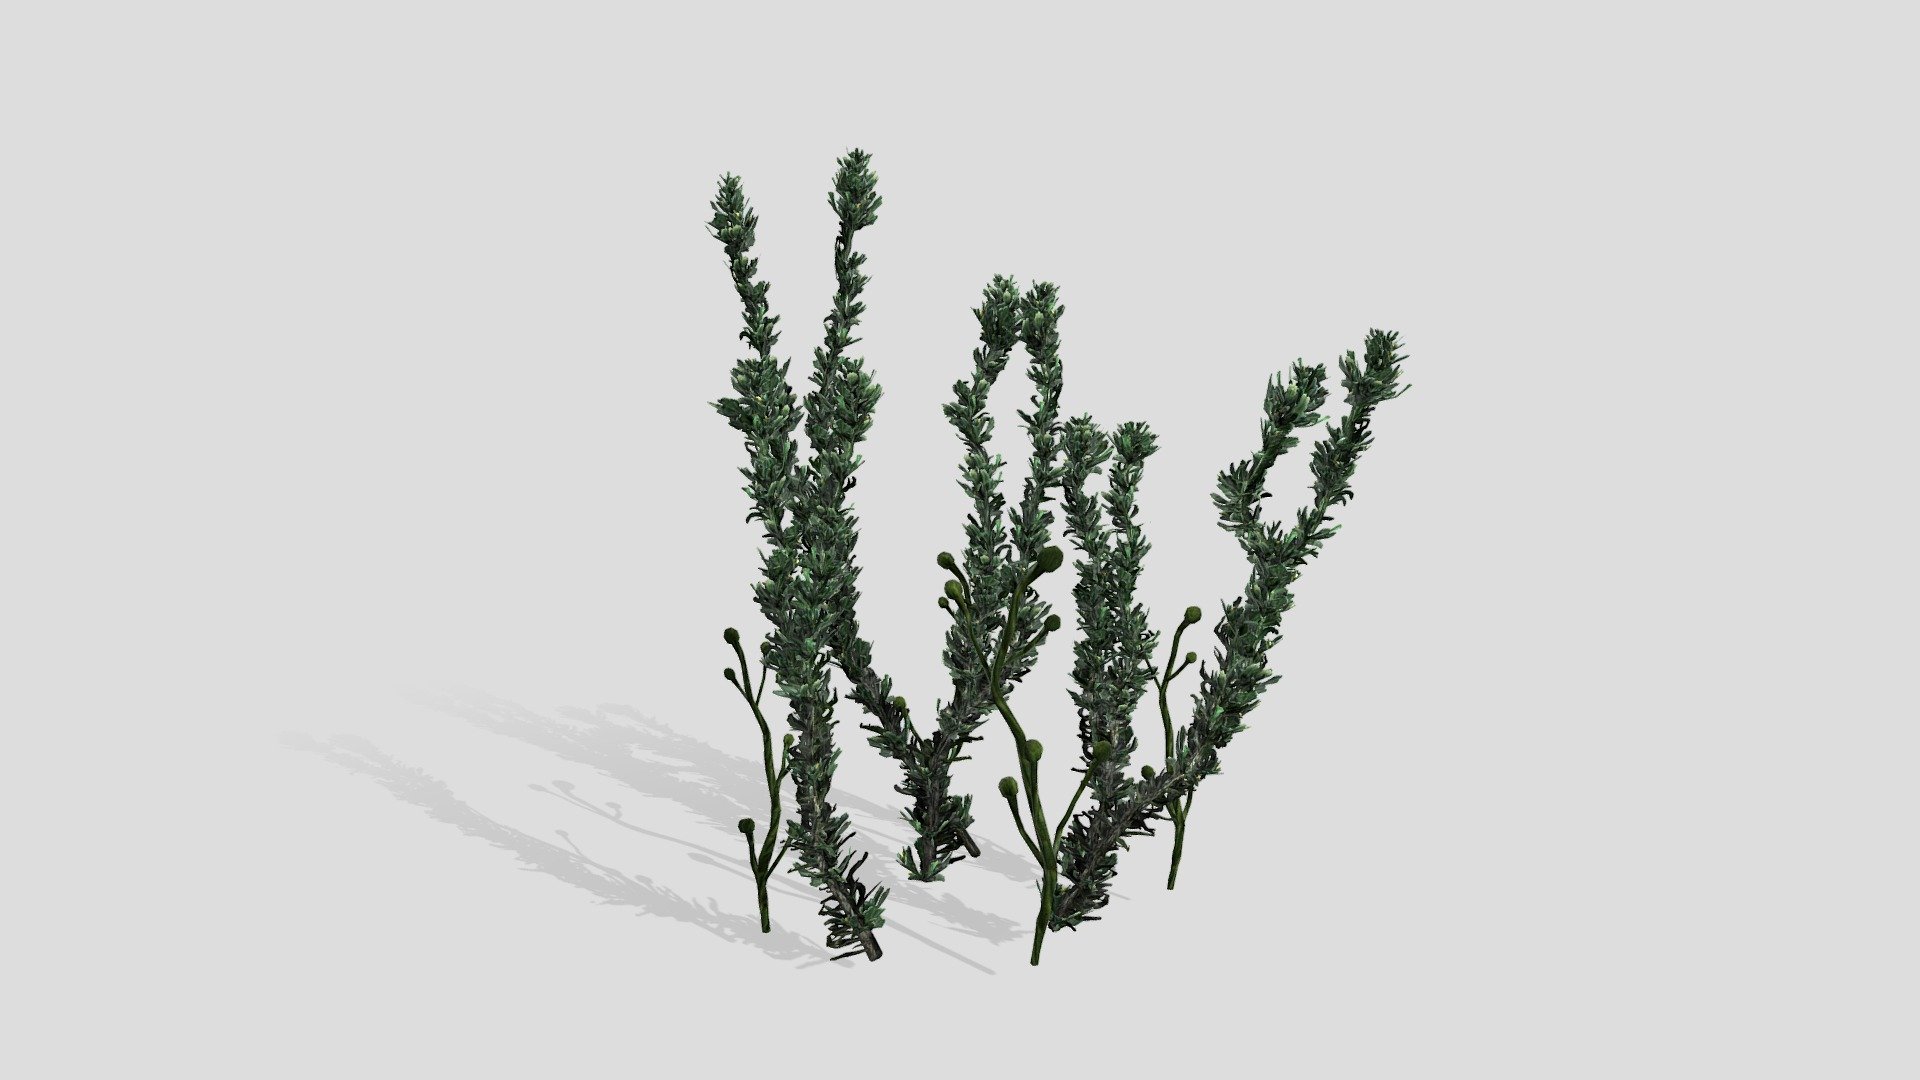 Pond Weed (Elodea). Pond Weed (also known as Waterweed and Anacharis) is a fully underwater, oxygenating aquatic plant common to ponds. Pond Weed is a popular aquarium vegetation 3d model